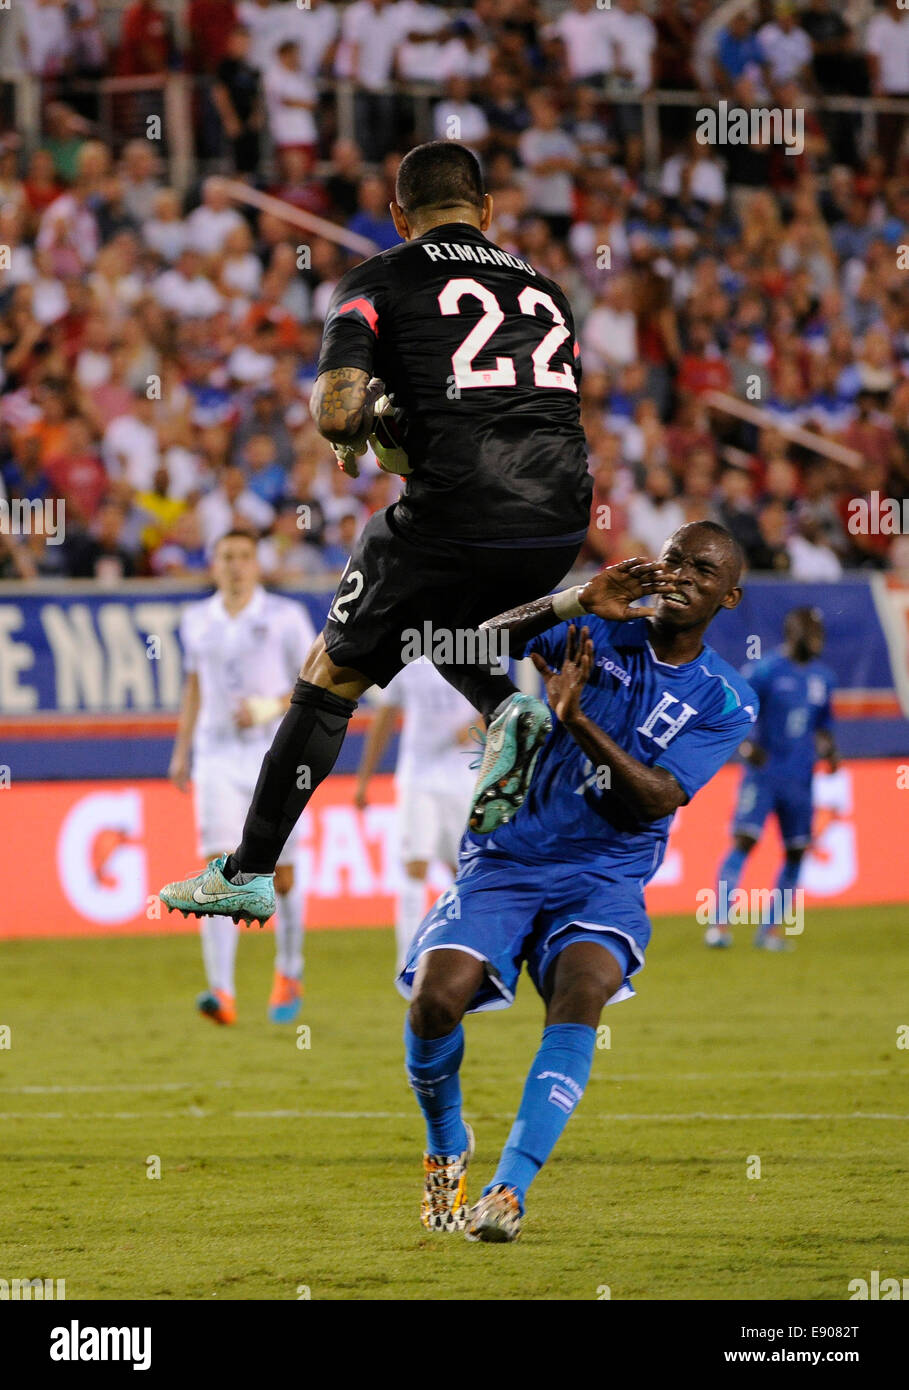 Florida, USA. 14th Oct, 2014. United States Goalkeeper Nick Rimando (22) makes a save in front of Honduras Forward Alberth Elis (9) during an international friendly between the US Men's National Team and Honduras at FAU Stadium in Boca Raton, Florida © Action Plus Sports/Alamy Live News Stock Photo